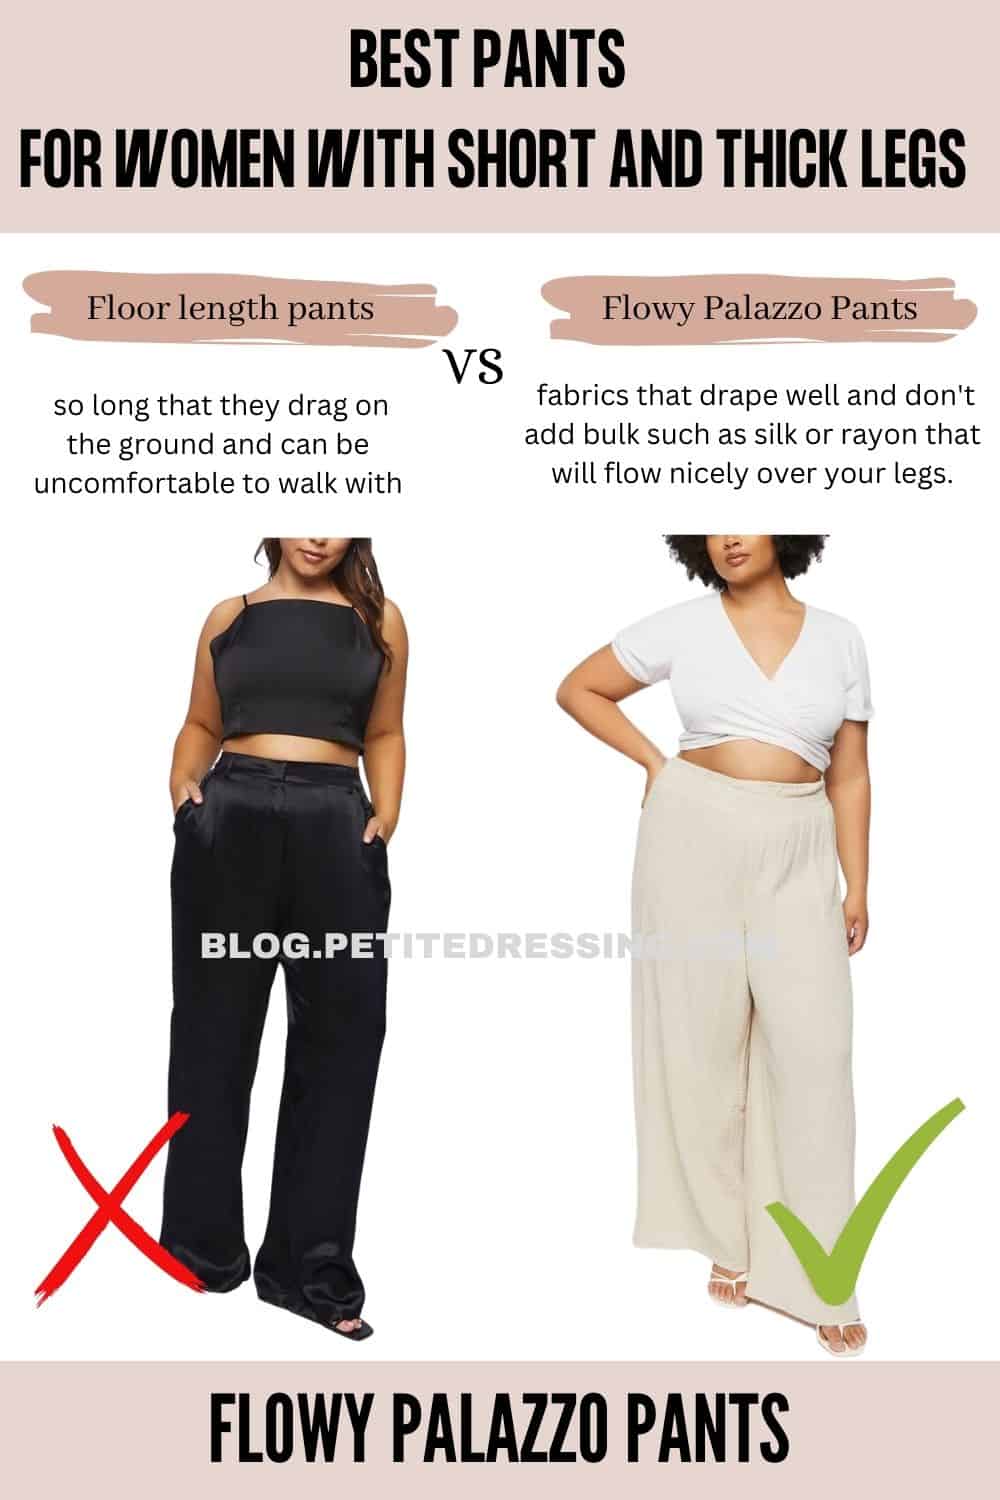 Pants Style Guide for Women with Short and Thick Legs